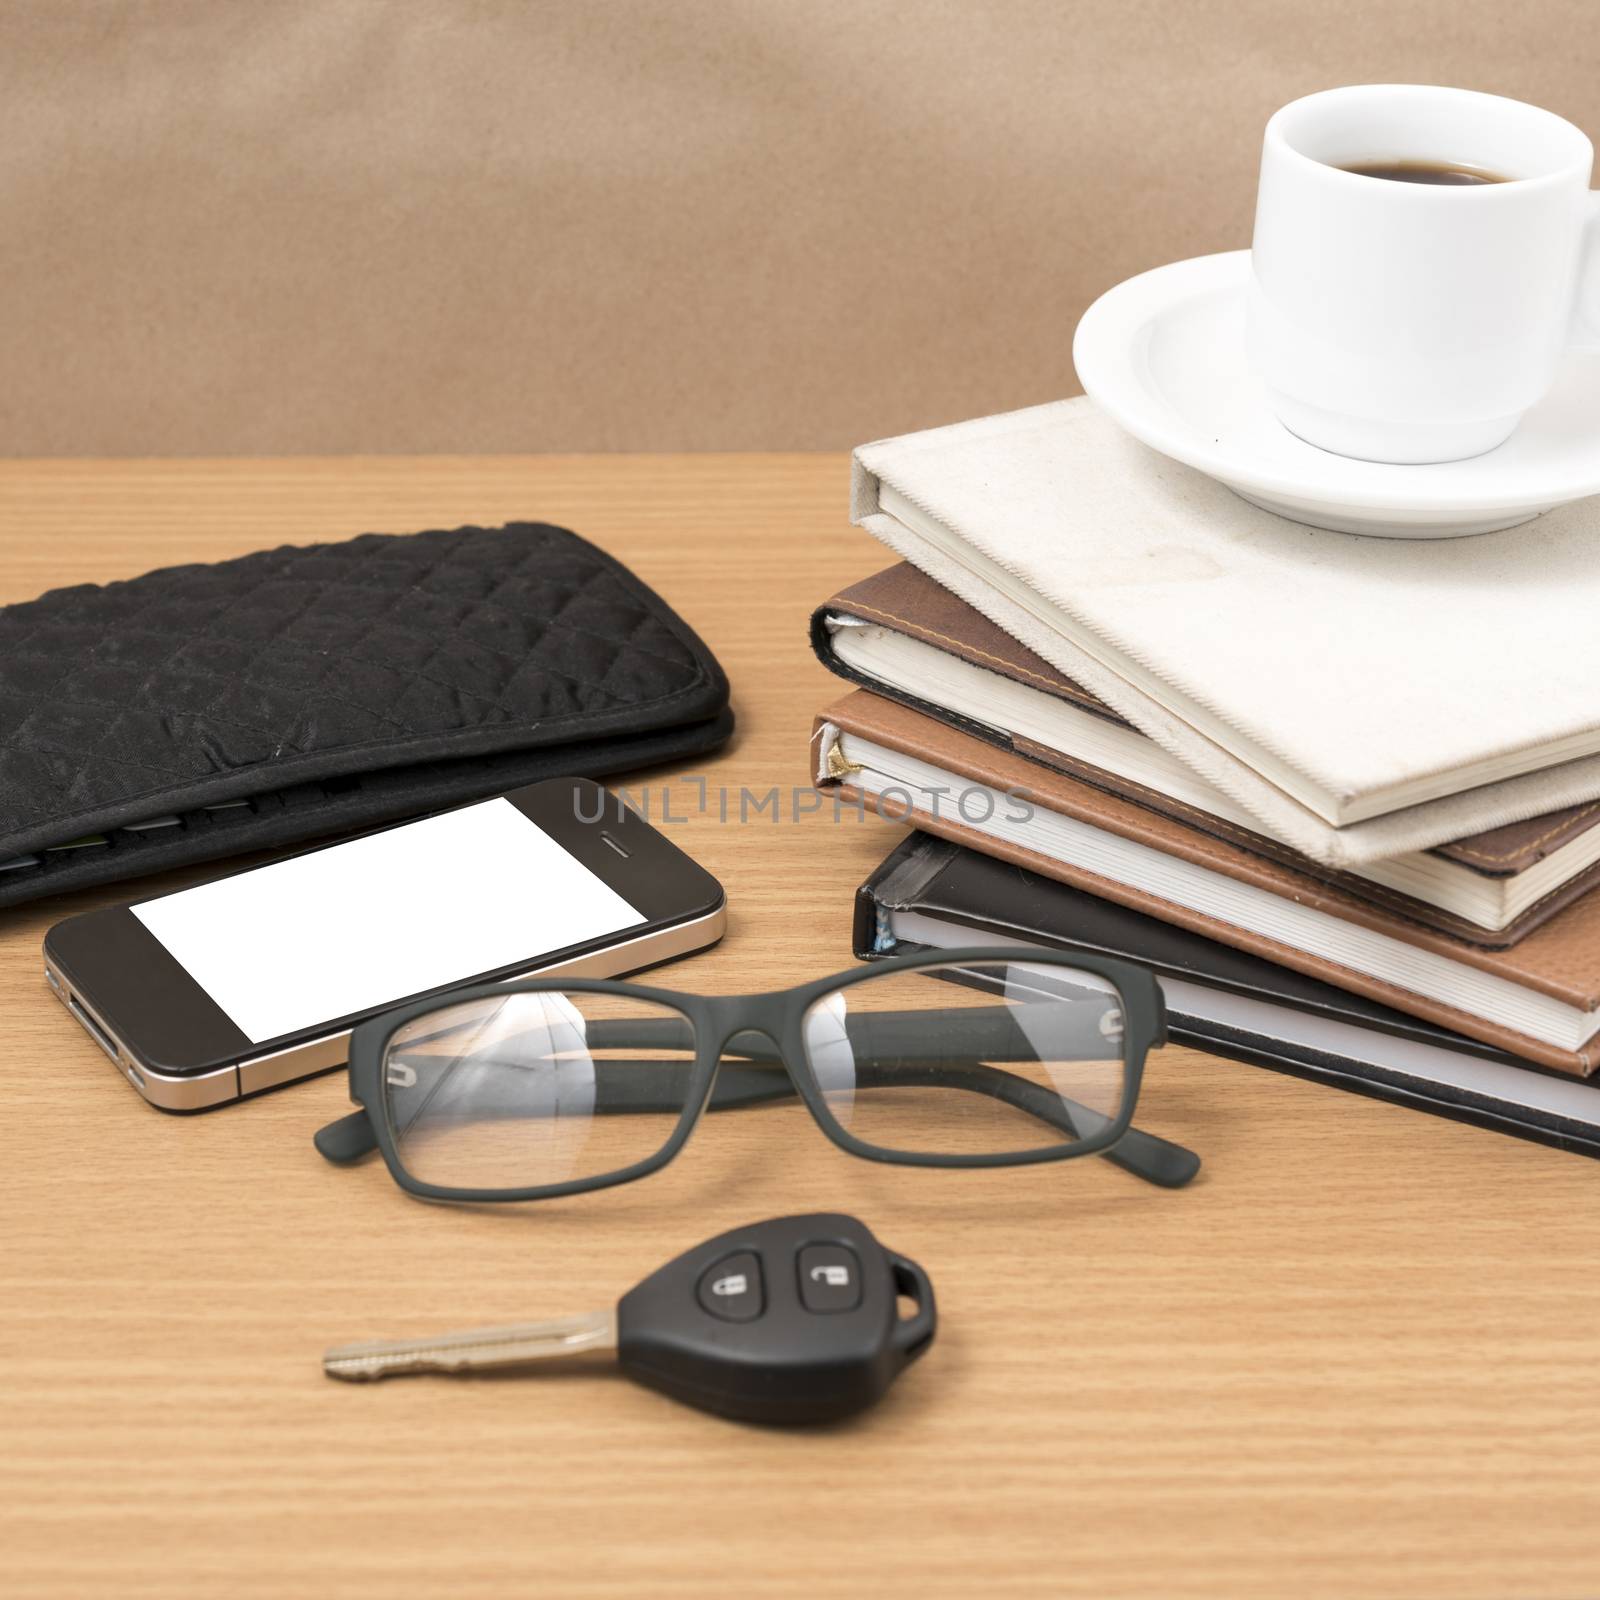 coffee and phone with stack of book,car key,eyeglasses and wallet on wood background